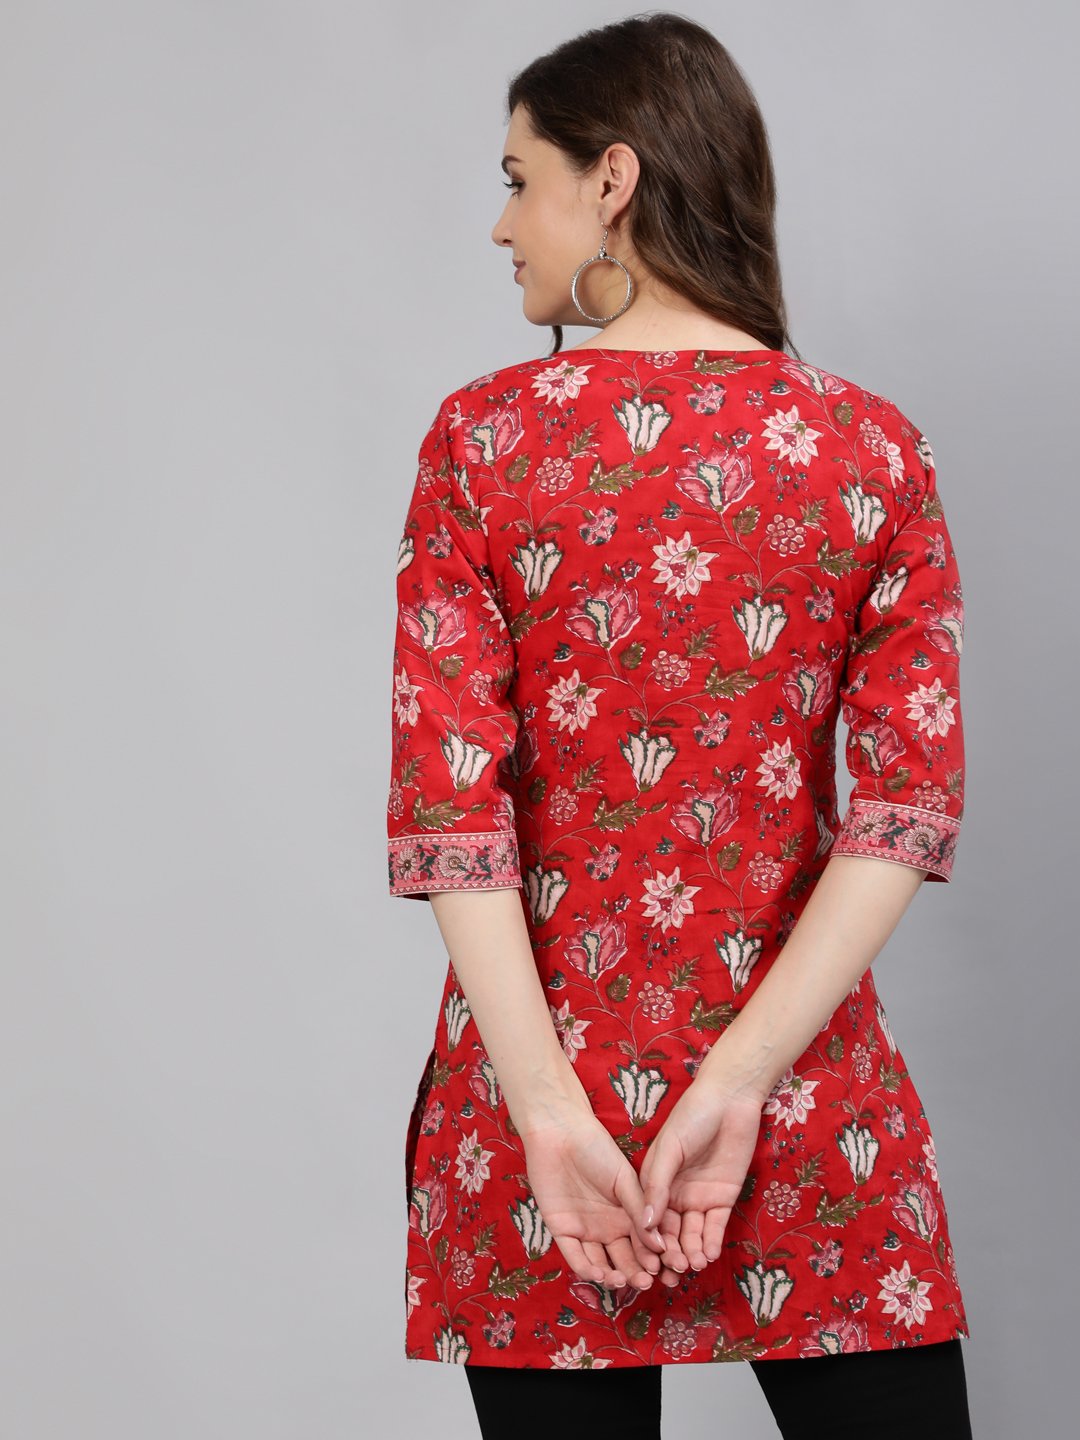 Women's Red Floral Printed Tunic With Three Quarter Sleeves - Nayo Clothing USA